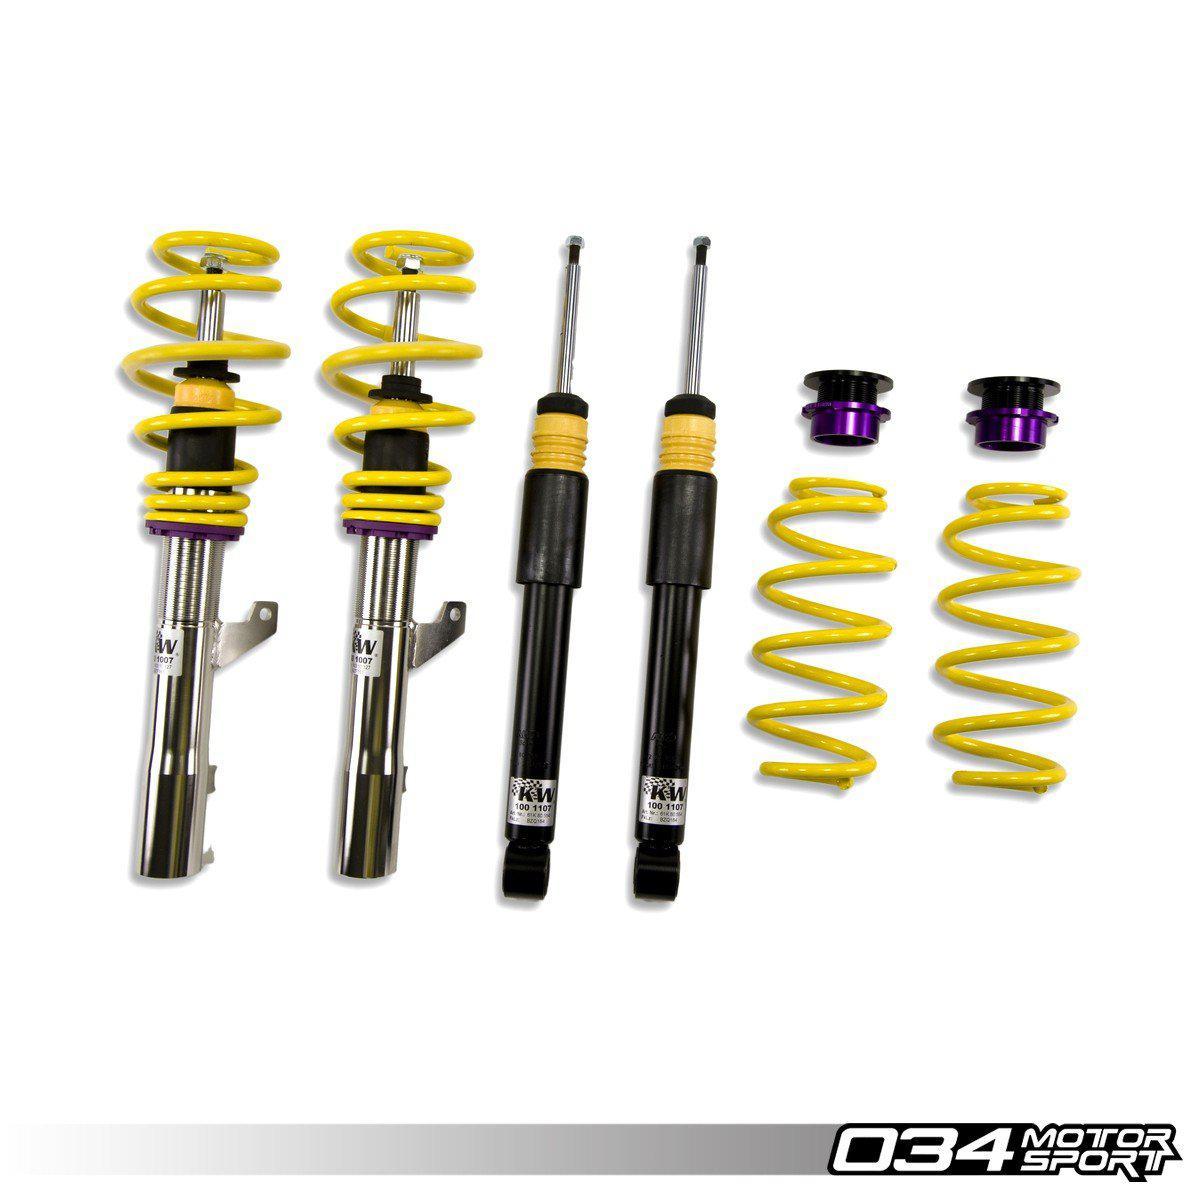 KW Variant 2 Coilover Suspension, B8/B8.5 Audi Q5/SQ5 Without Edc-A Little Tuning Co